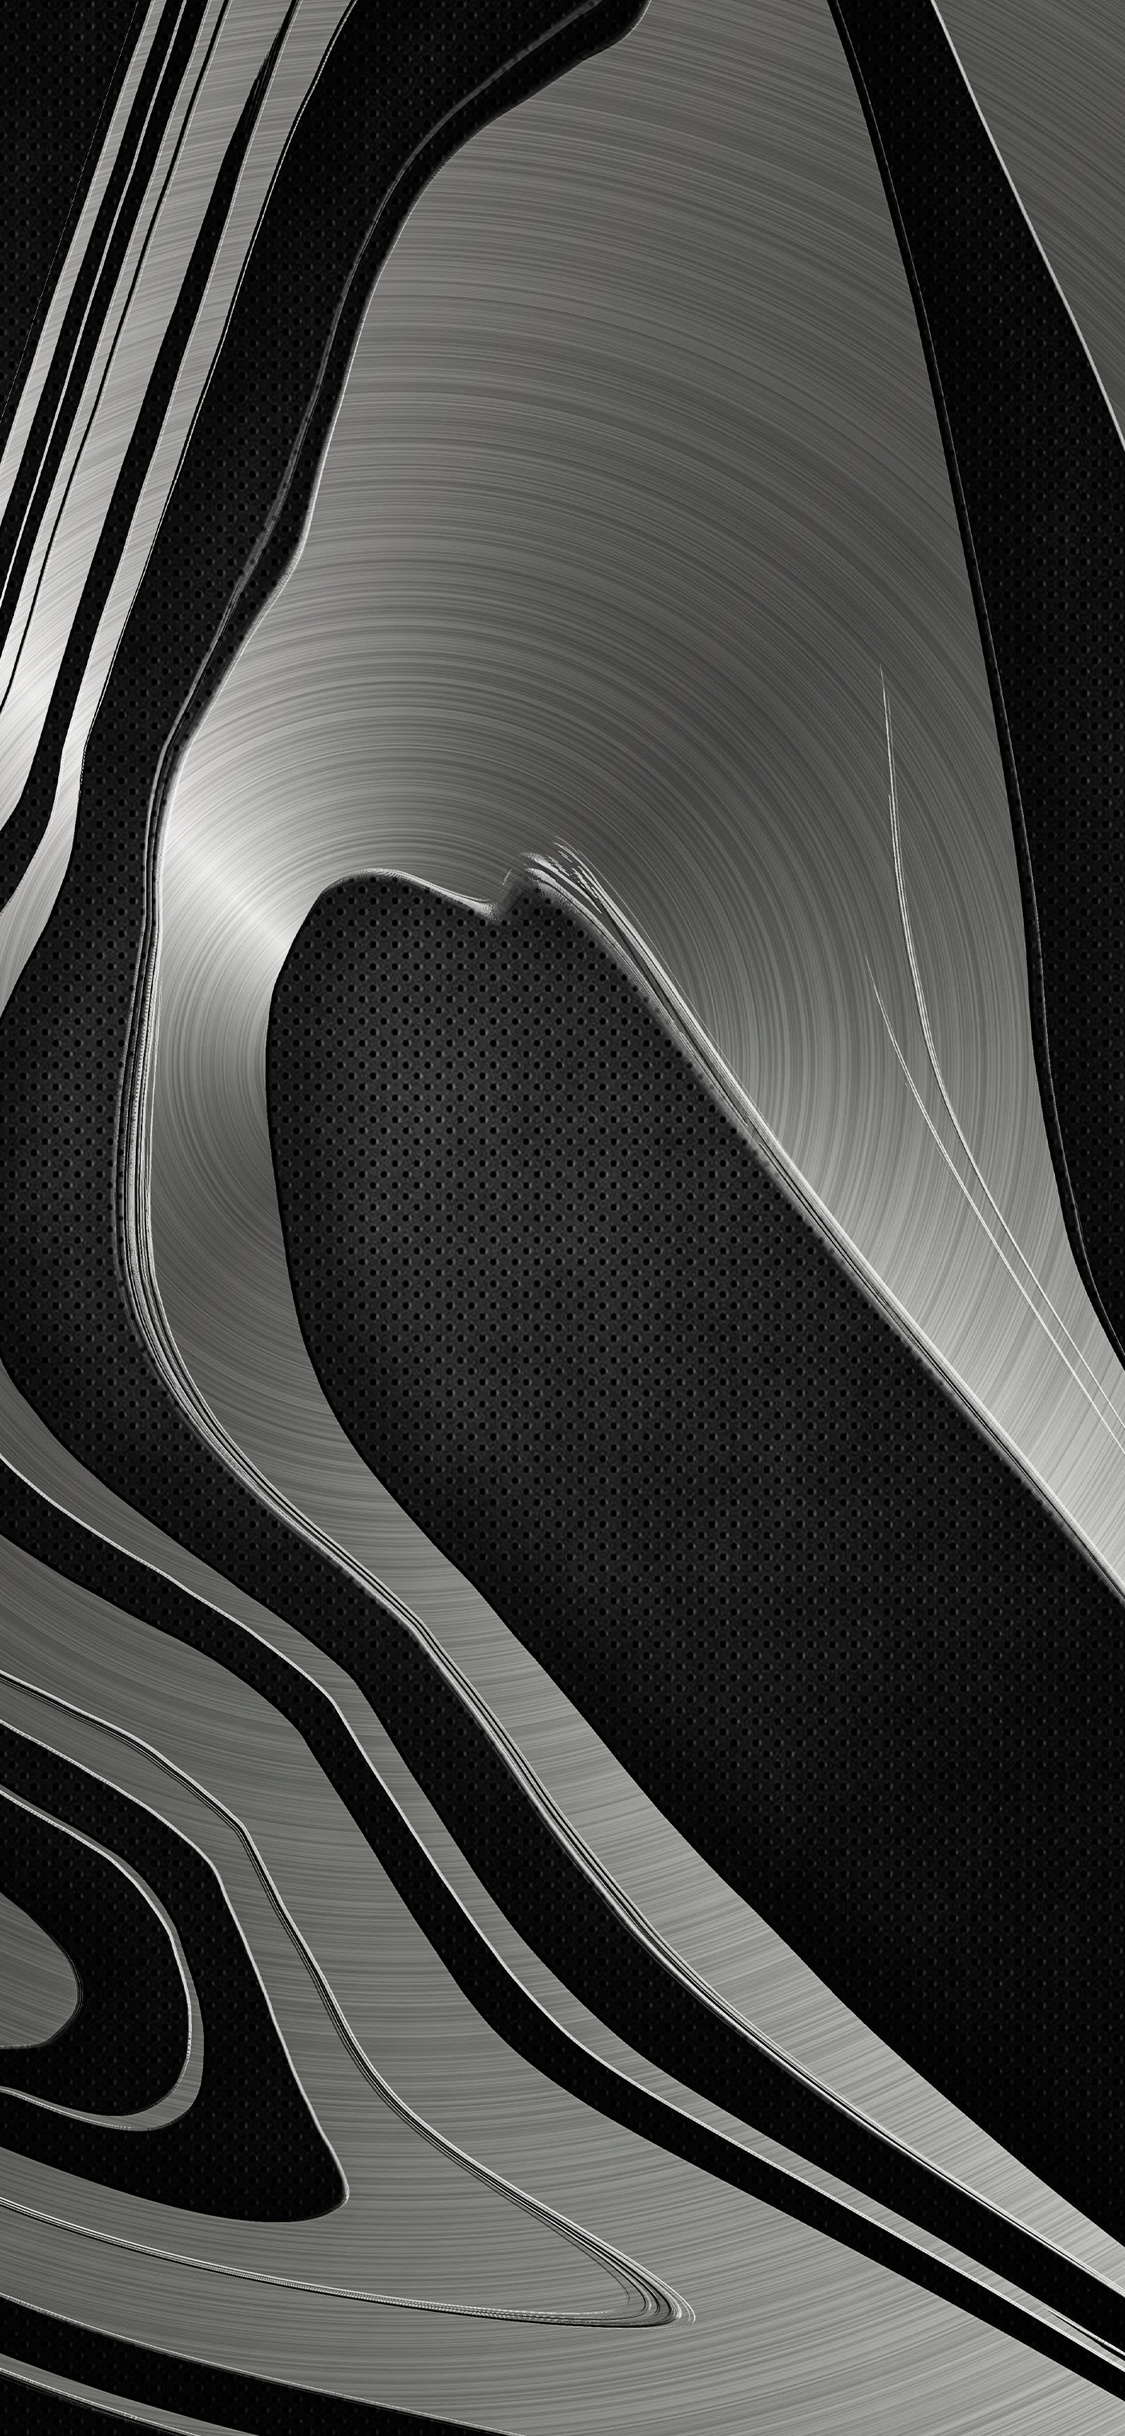 Silver, Wallpapers collection, Stylish designs, Minimalistic art, 1130x2440 HD Handy